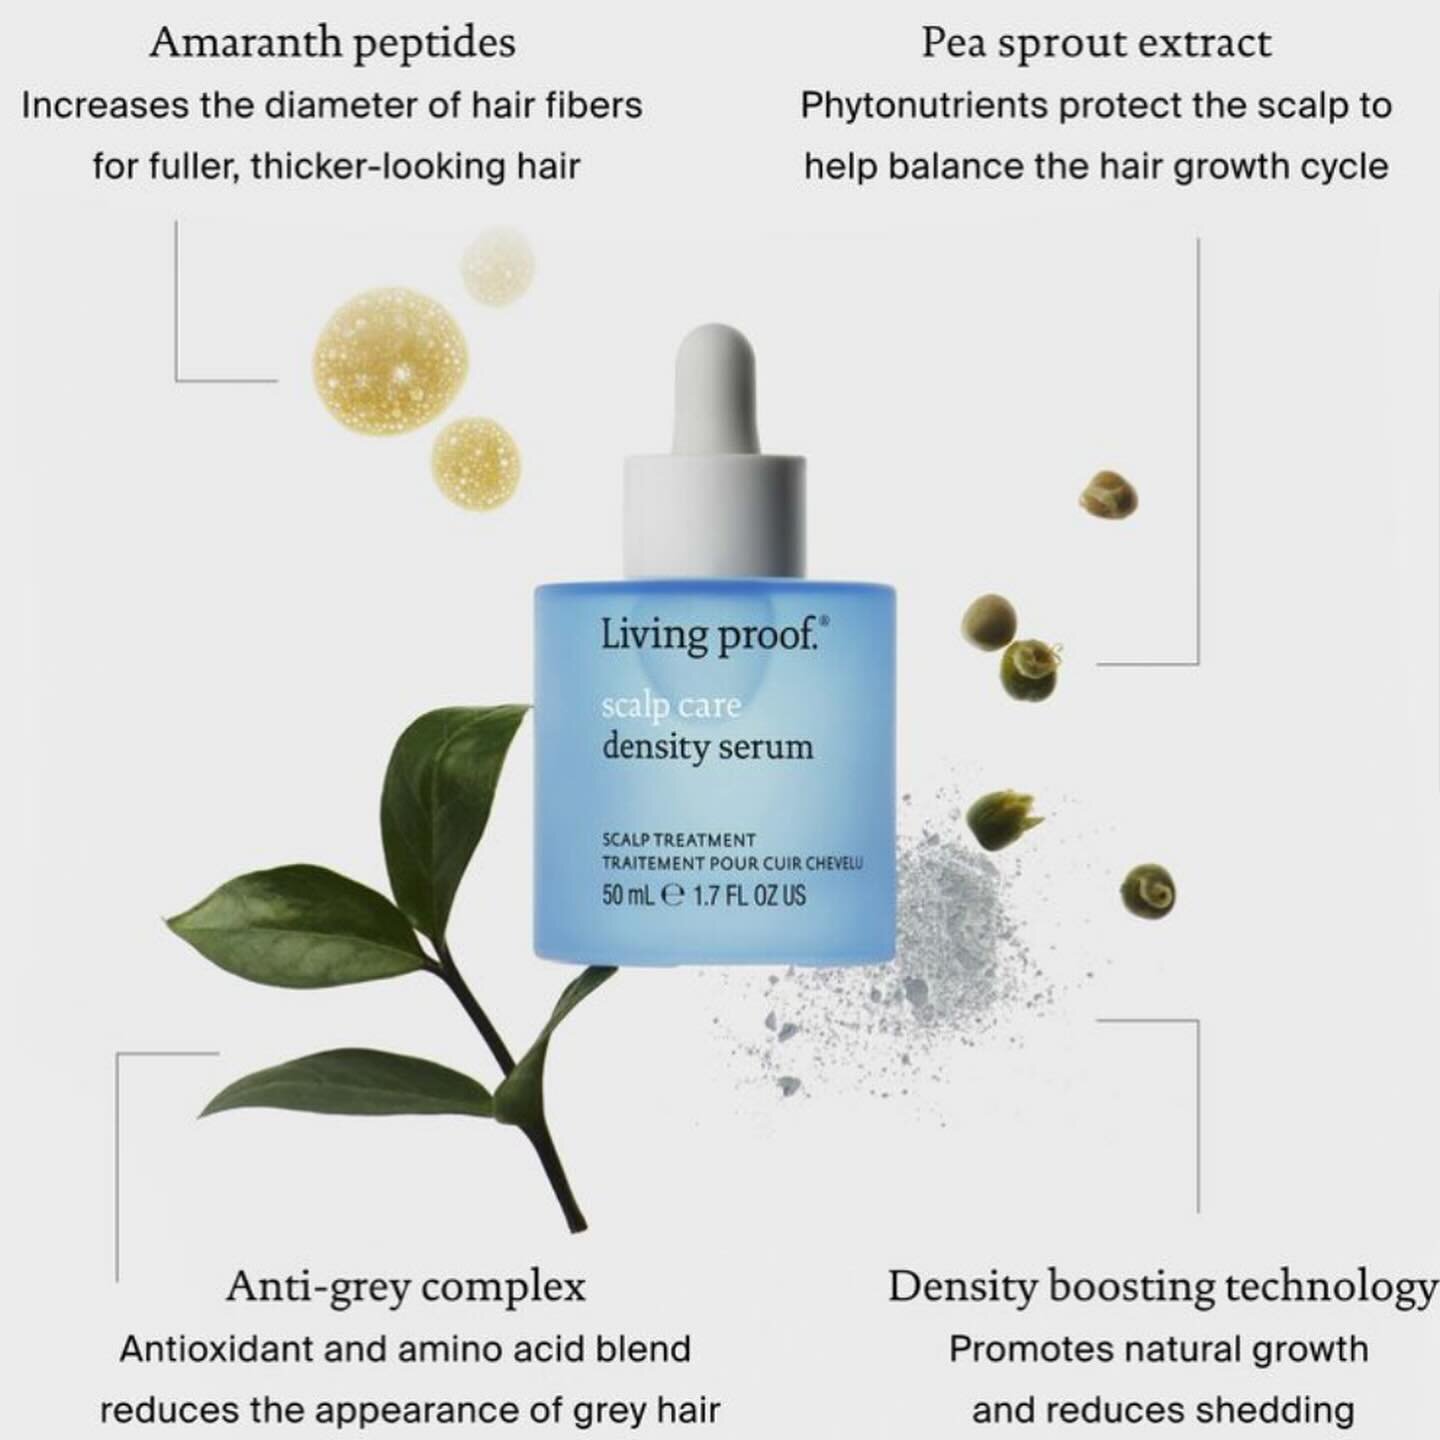 ⭐️ NEW ⭐️ @livingproofinc Density Serum 💧 

A scalp serum formulated to minimize the appearance of grey hair, reduce shedding, increase hair density, and promote hair growth in as little as 90 days 😯 

➡️ available now at Beauty Craft 

www.beautyc